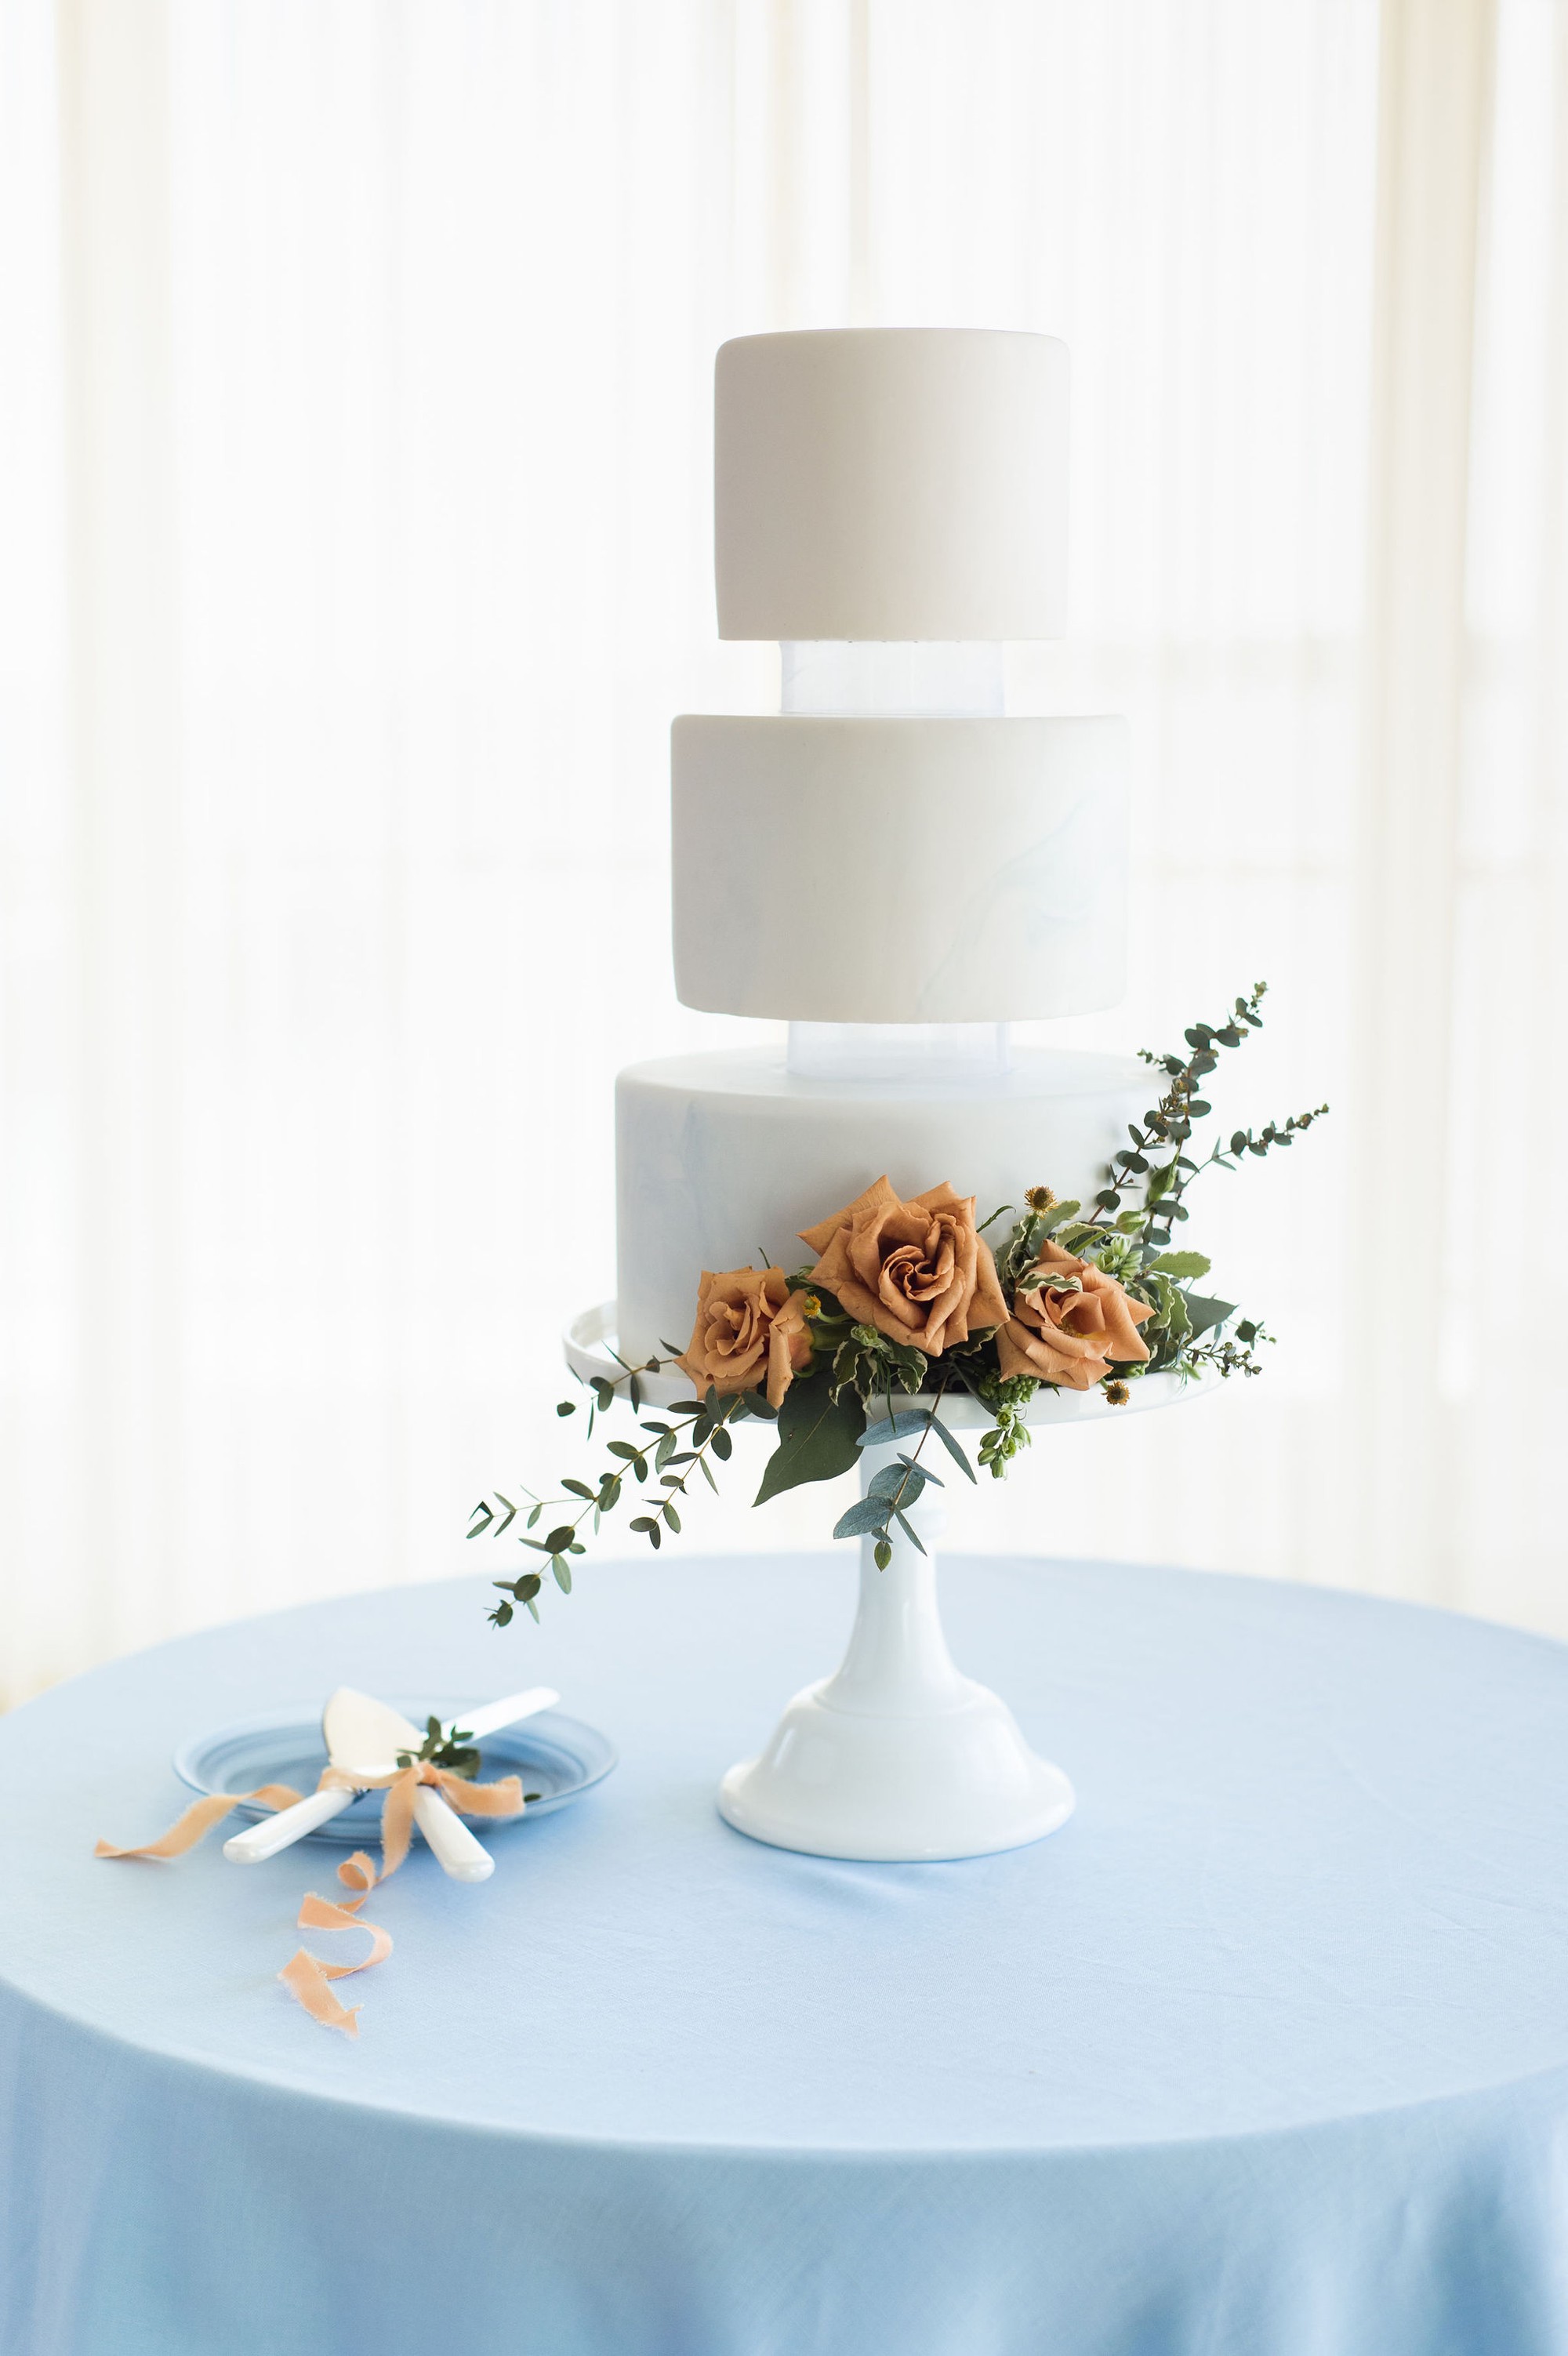 Tuscan meets modern | modern three floating tier wedding cake with pale blue marbling by Silver Whisk Bakery